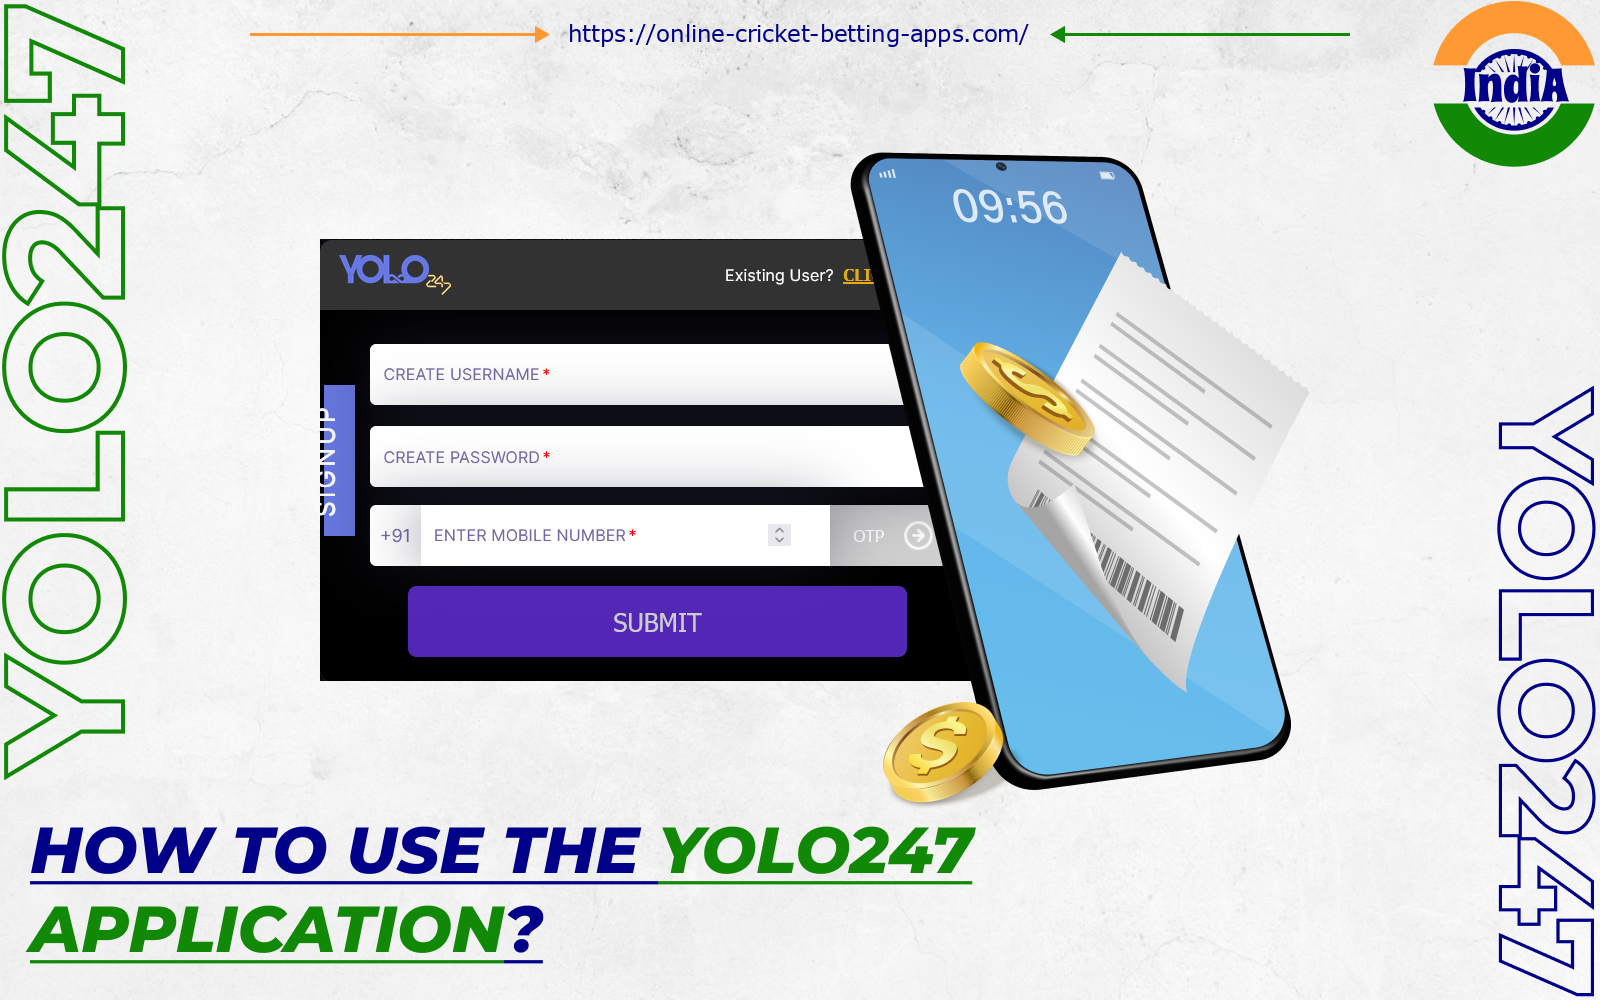 Any Indian user above 18 years of age can start gambling on the Yolo247 app after registering and making a deposit